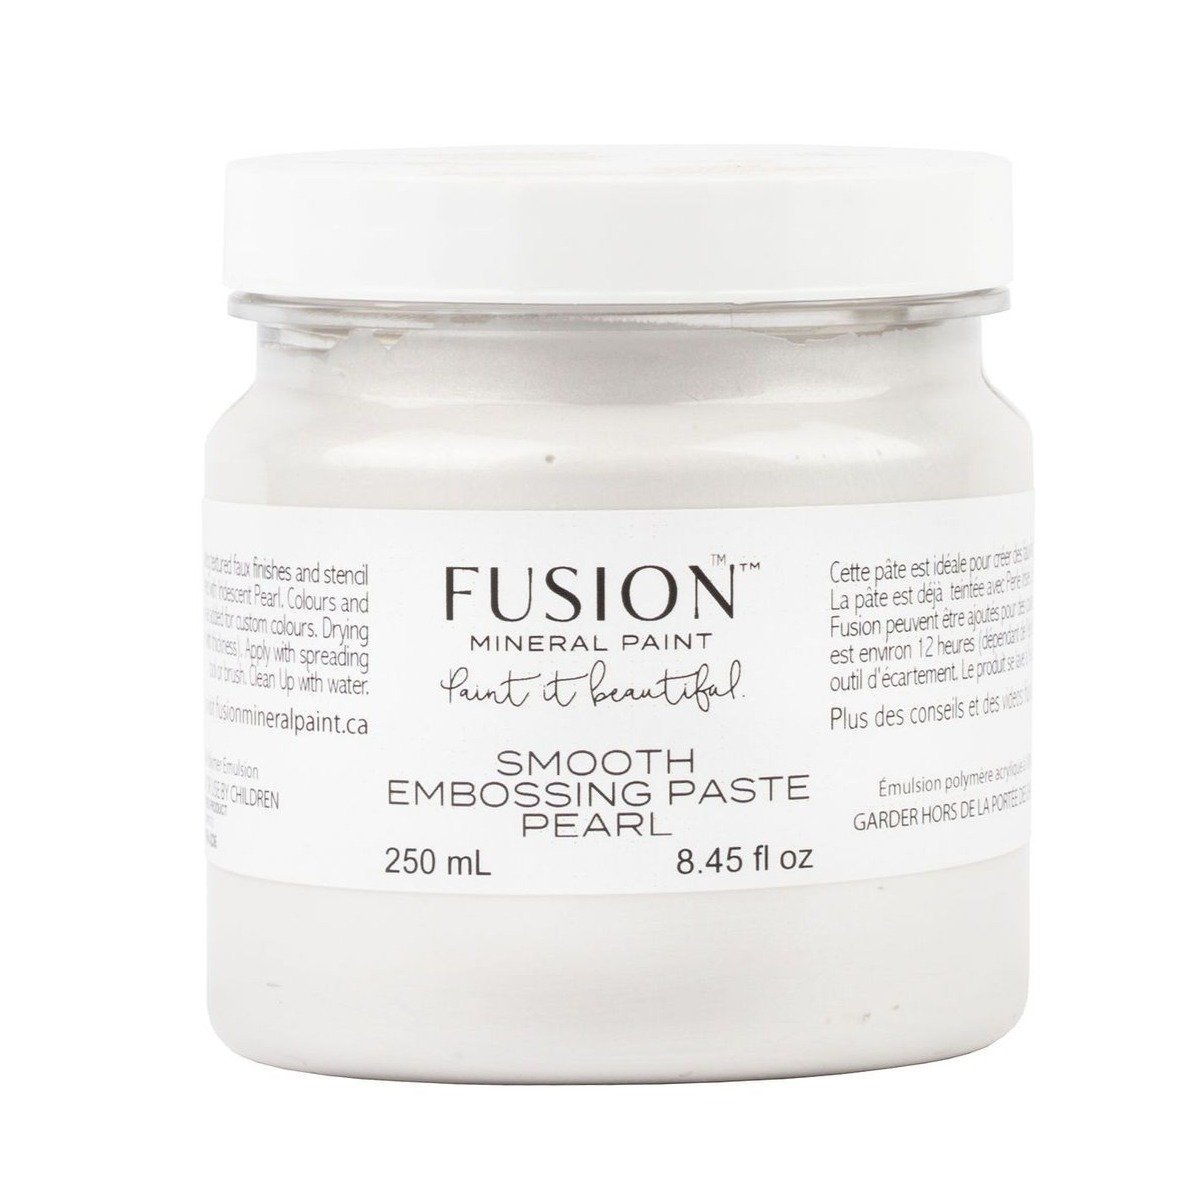 SMOOTH EMBOSSING PASTE PEARL - Fusion Mineral Paint - 250ml